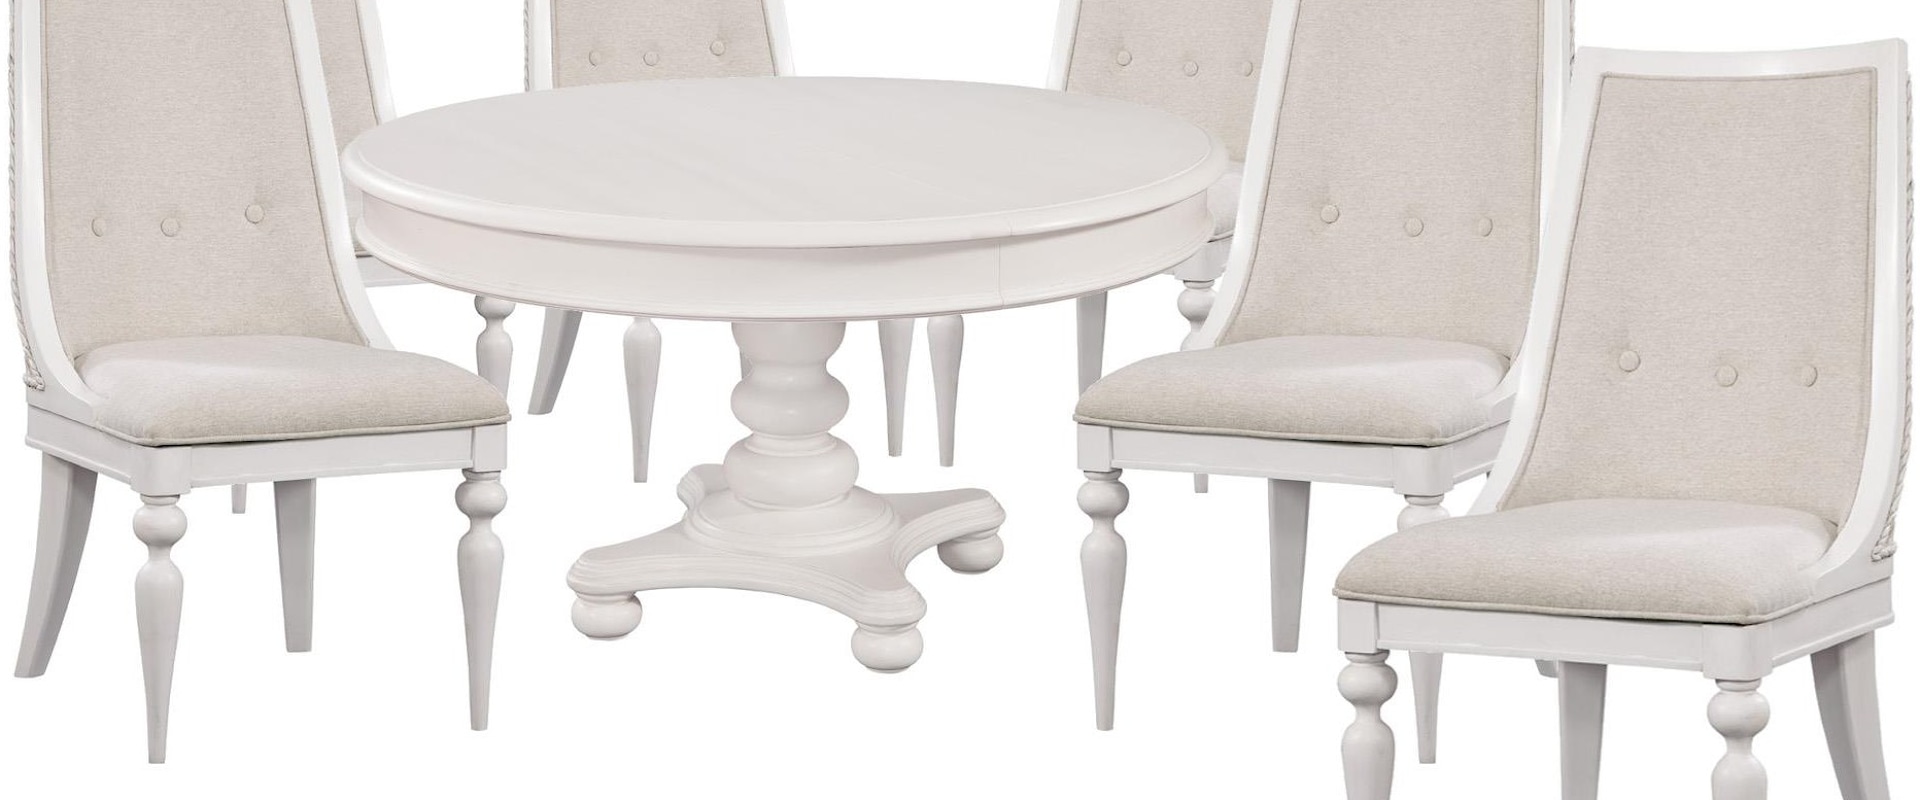 Oval Pedestal Table and 6 Woven Side Chair